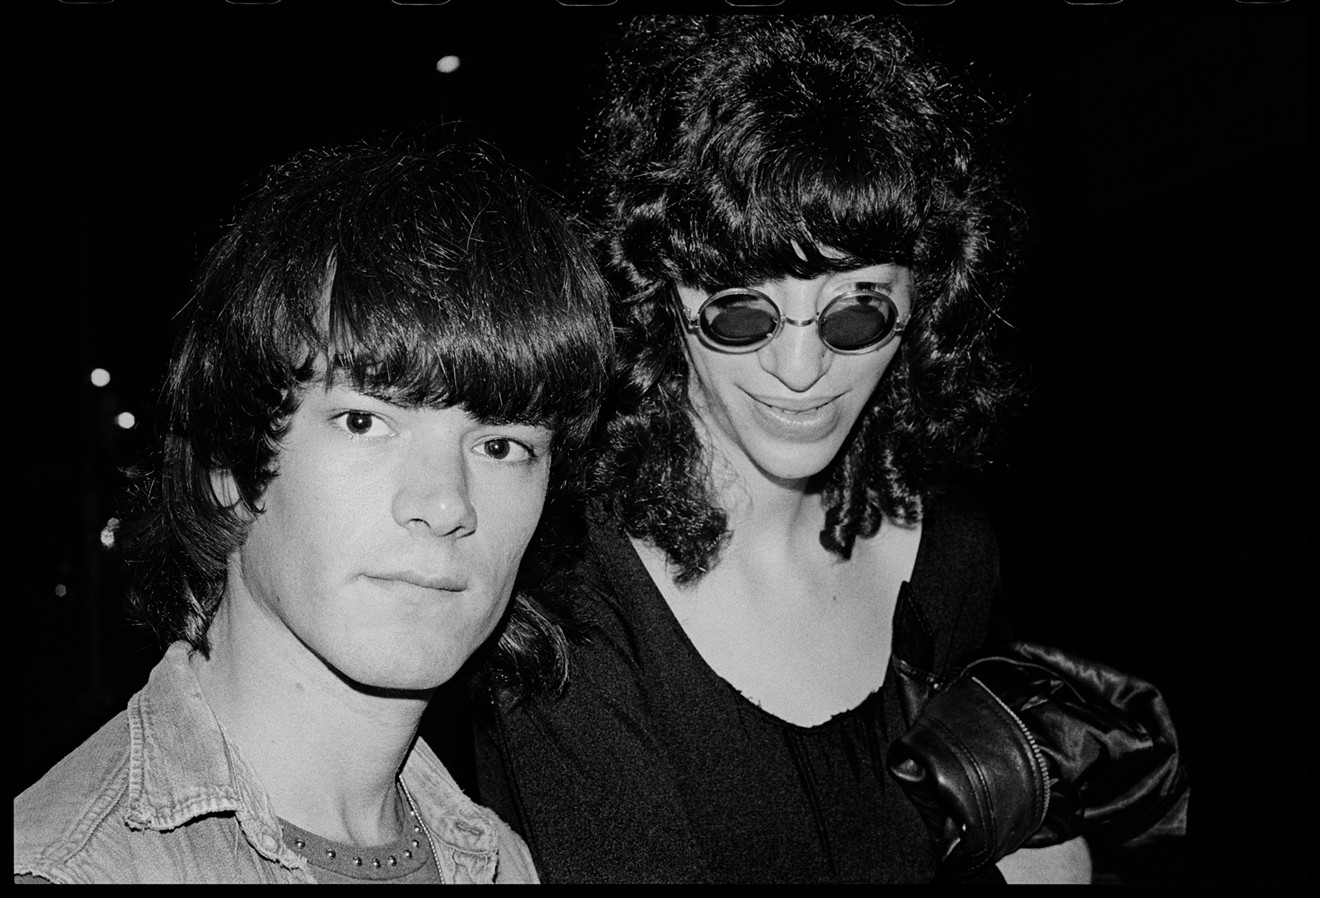 Dee Dee Ramone and Joey Ramone backstage at a punk rock show.